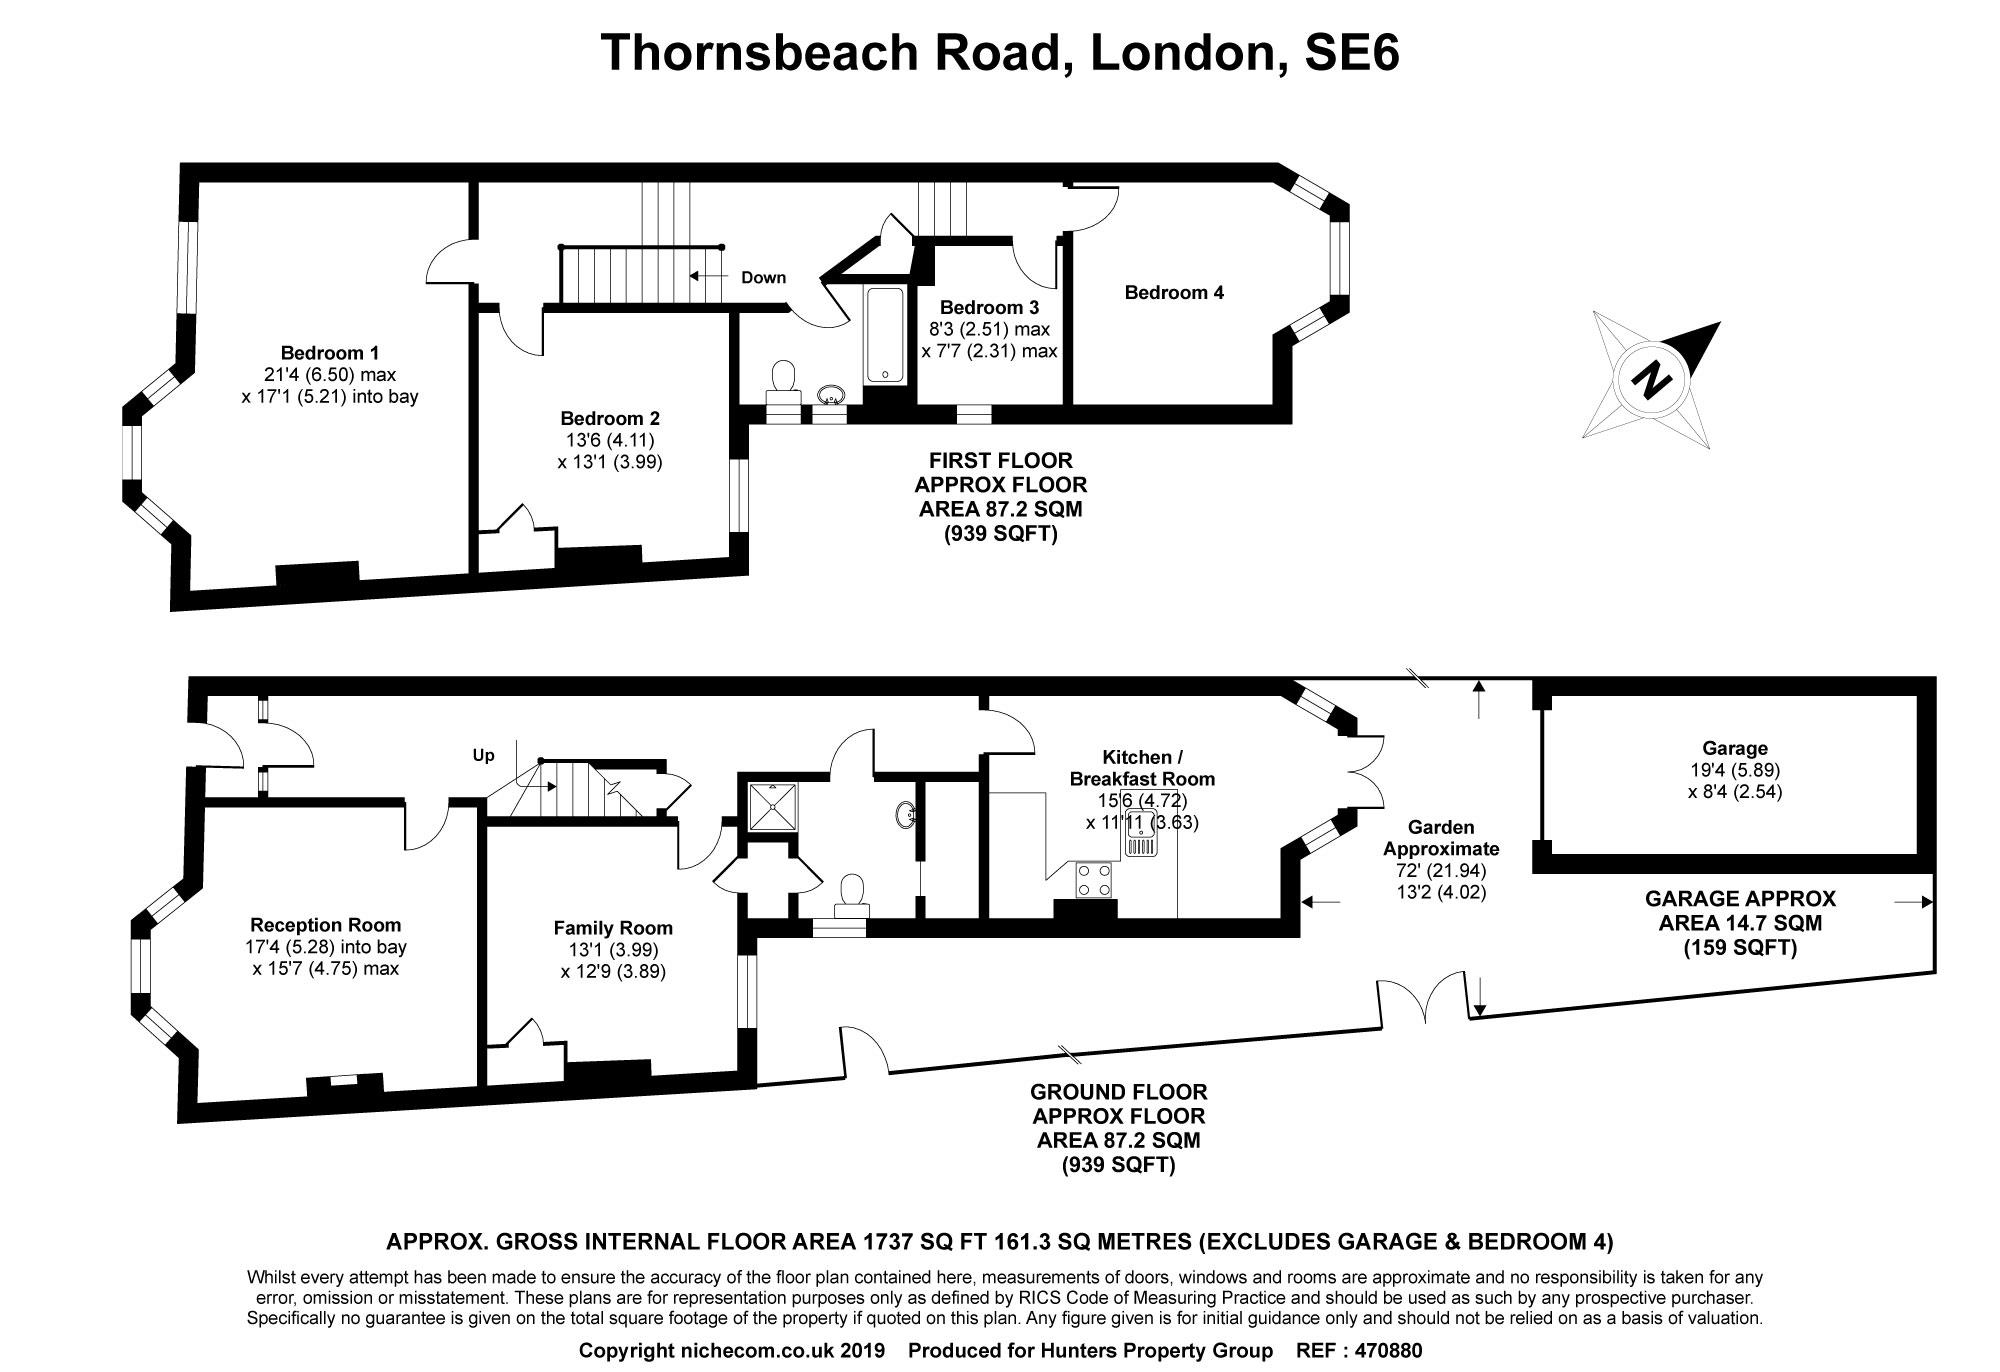 4 Bedrooms Semi-detached house for sale in Thornsbeach Road, London SE6